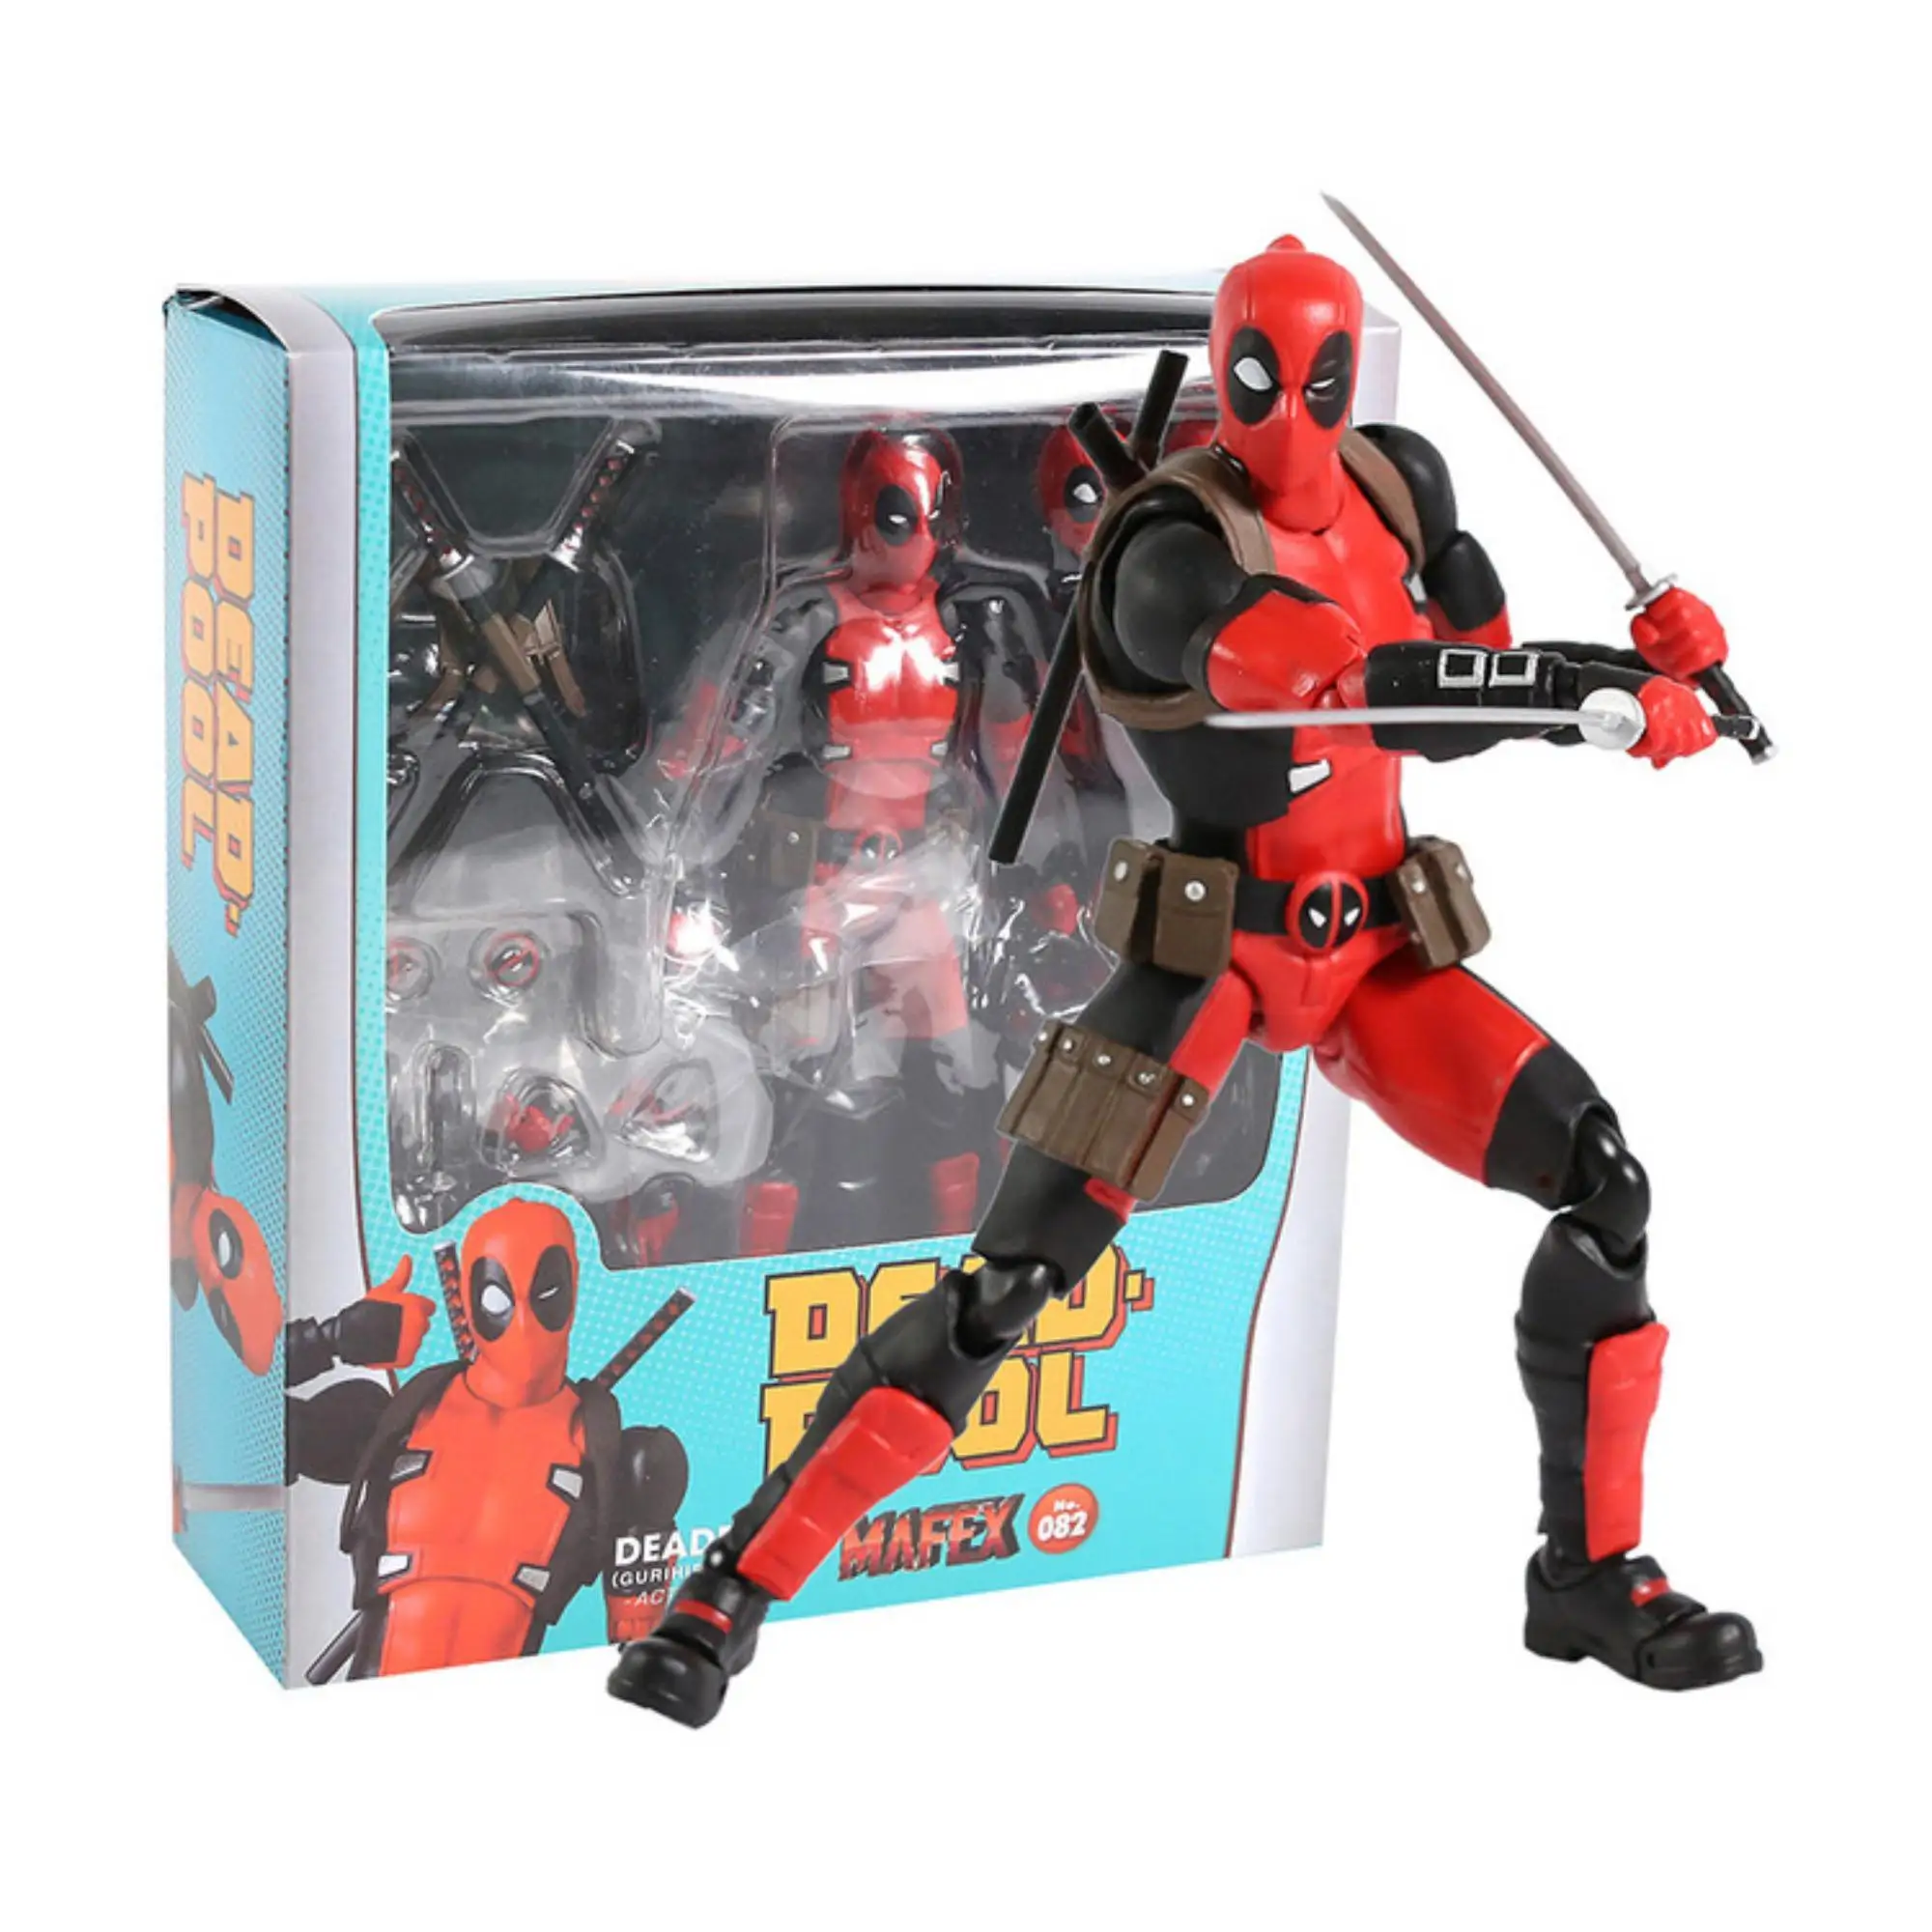 

Marvel 16cm Mafex 082 X-men Deadpool Action Figure Comic Version Collectable Model Toy Doll Children Birthday Christmas Gifts